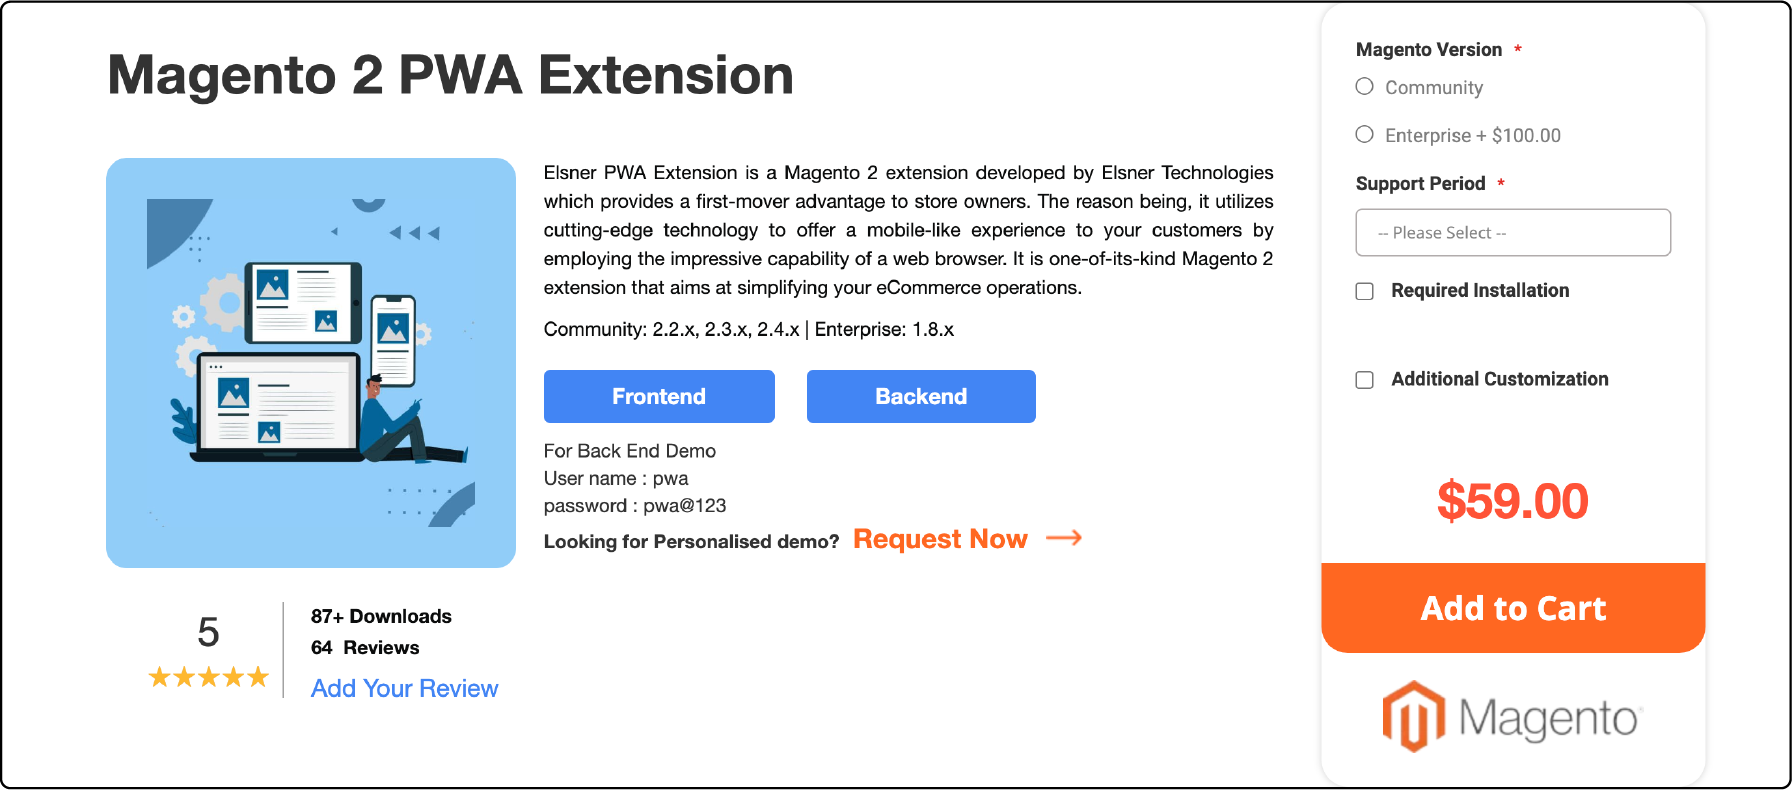 Elsner Technologies' Magento 2 PWA Extension for bridging web and mobile experiences
